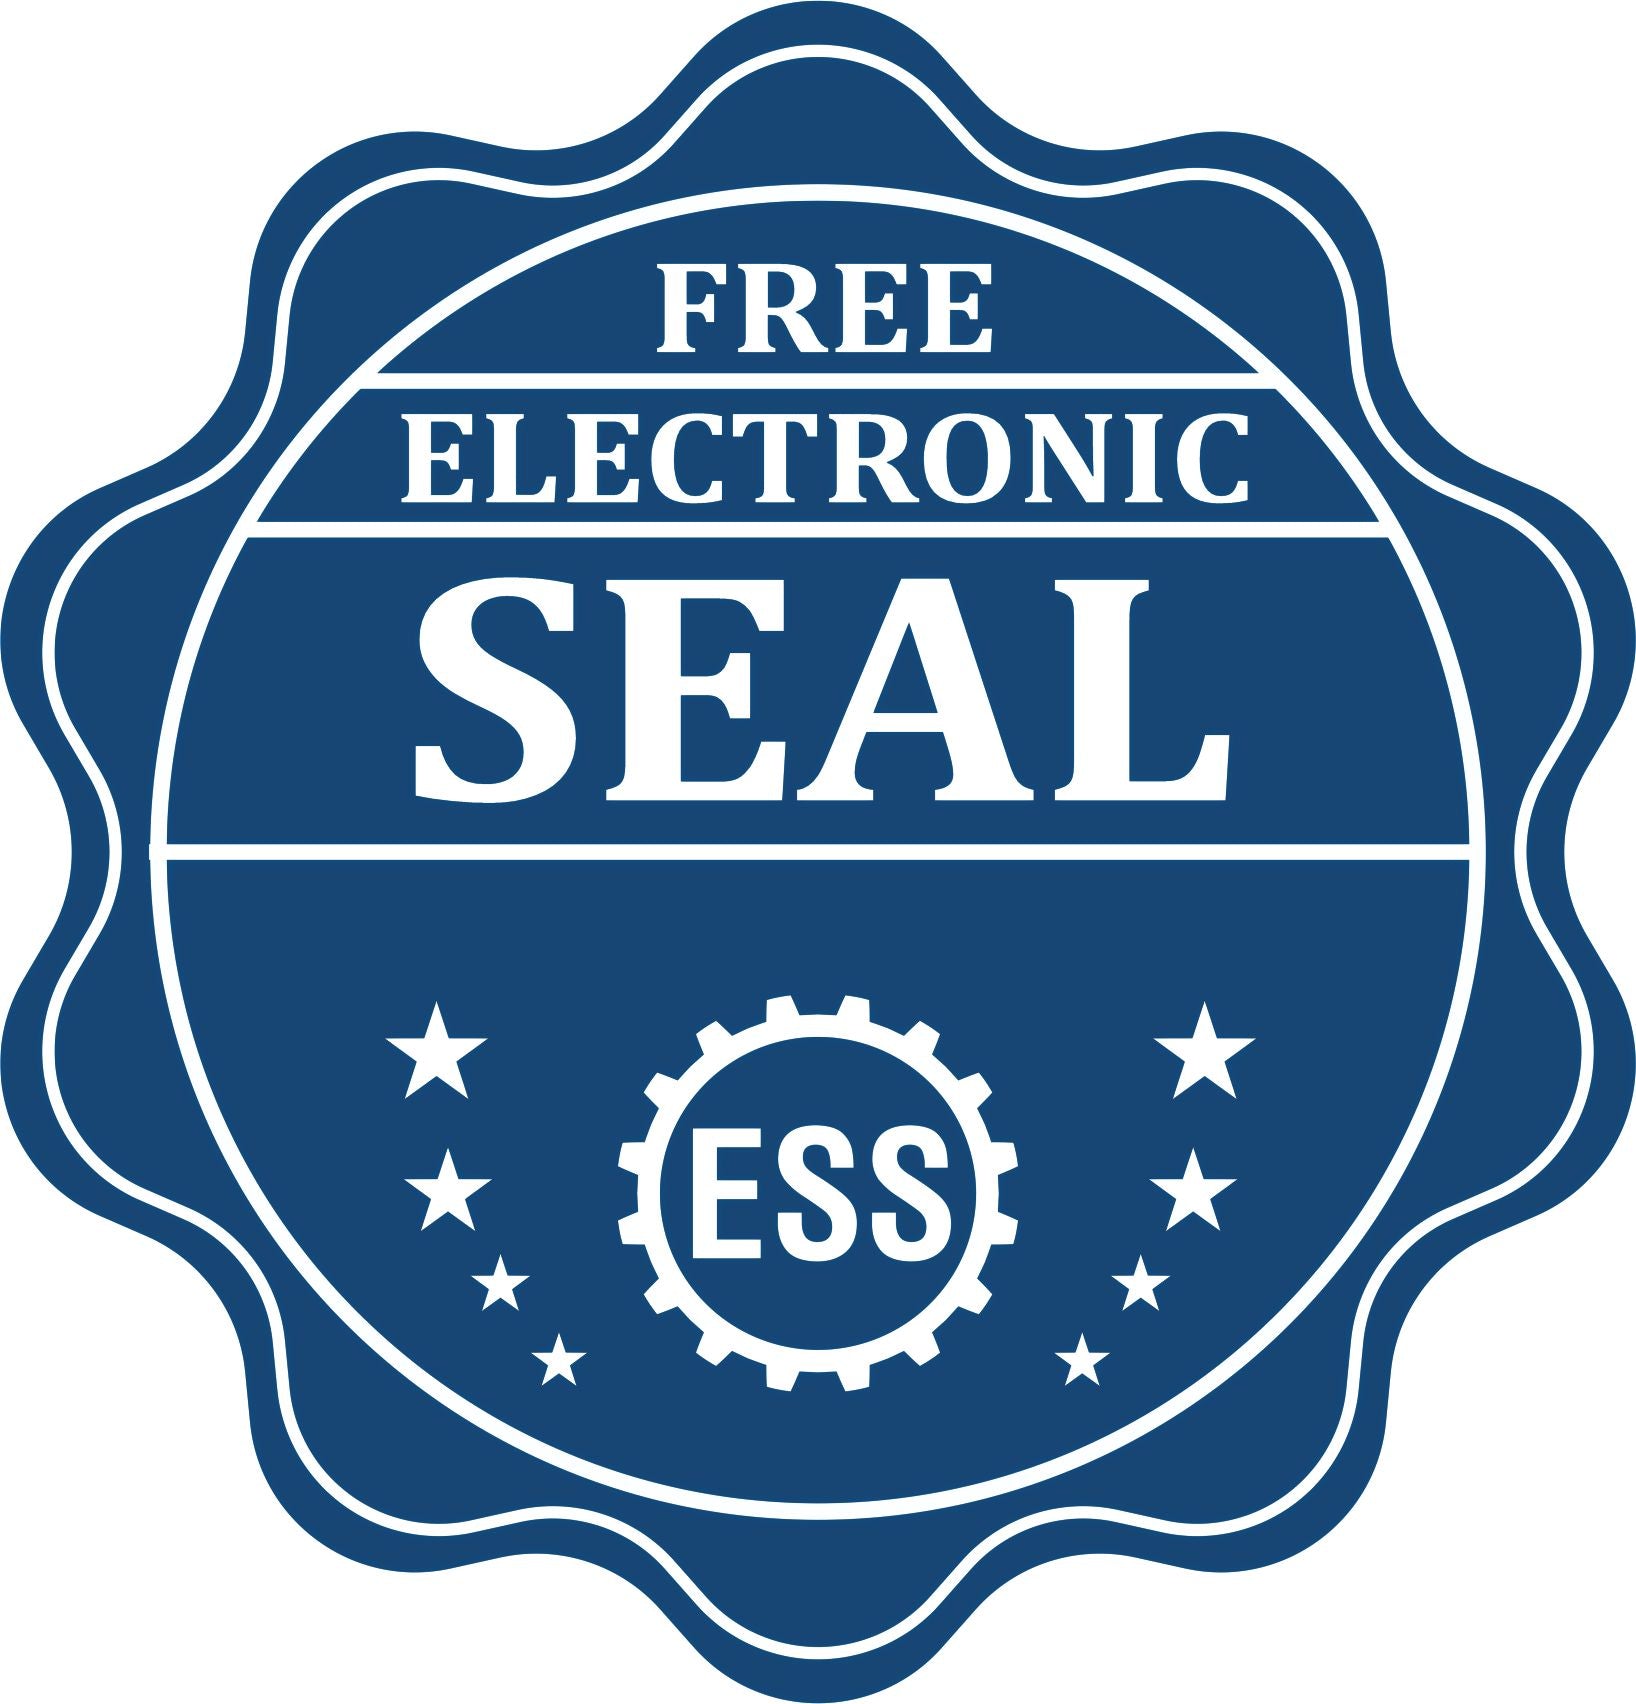 A badge showing a free electronic seal for the Heavy Duty Cast Iron Delaware Geologist Seal Embosser with stars and the ESS gear on the emblem.